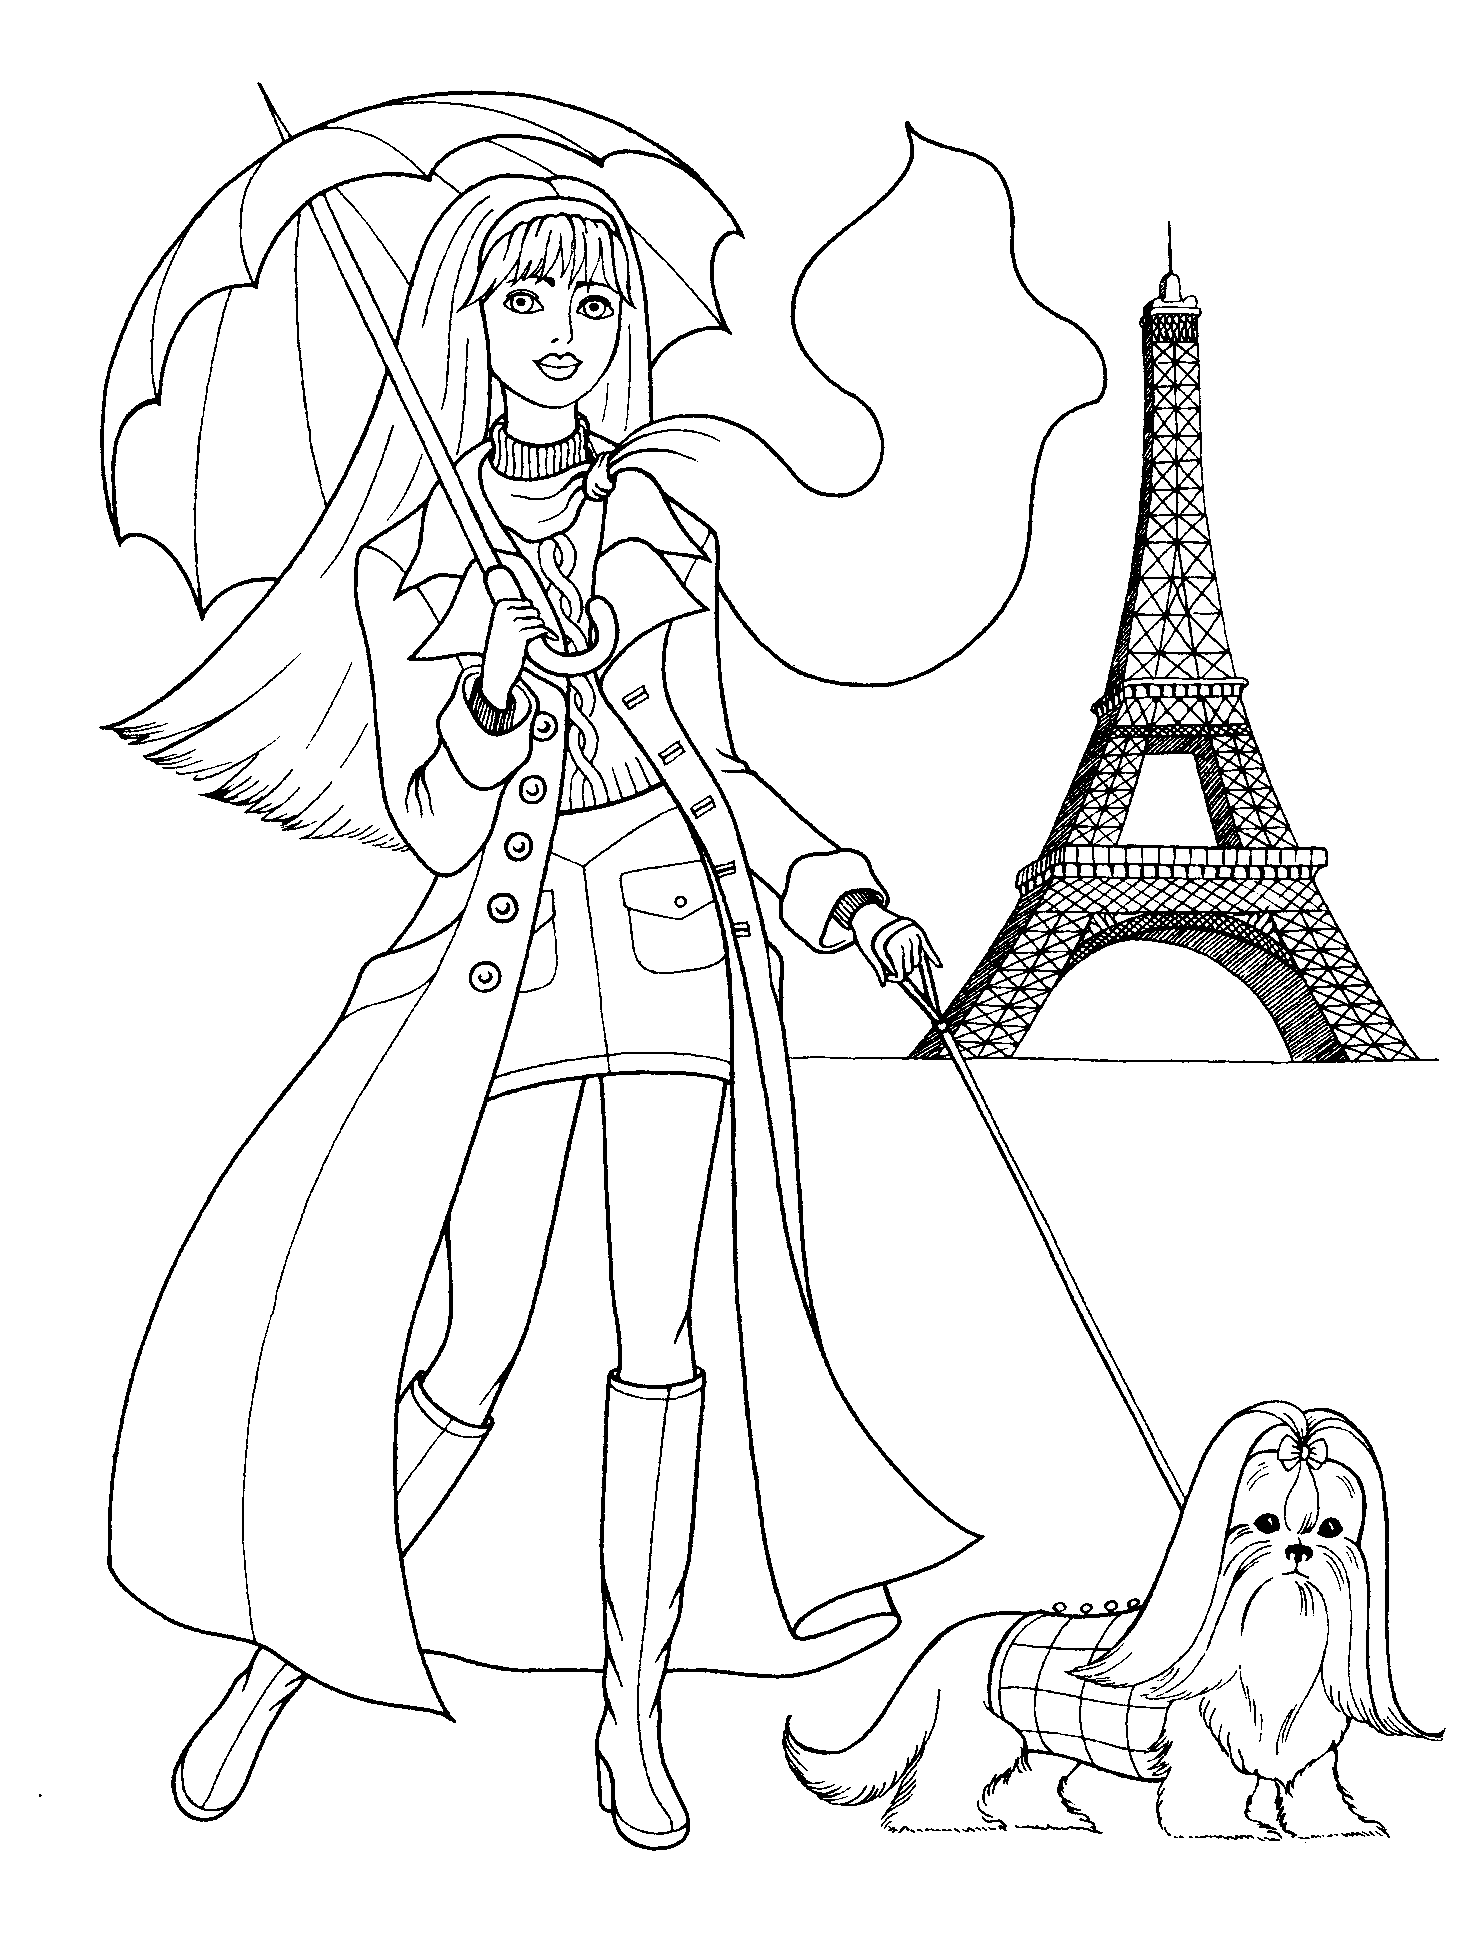 Fashionable girls coloring pages 8 / Fashionable girls / Kids ...